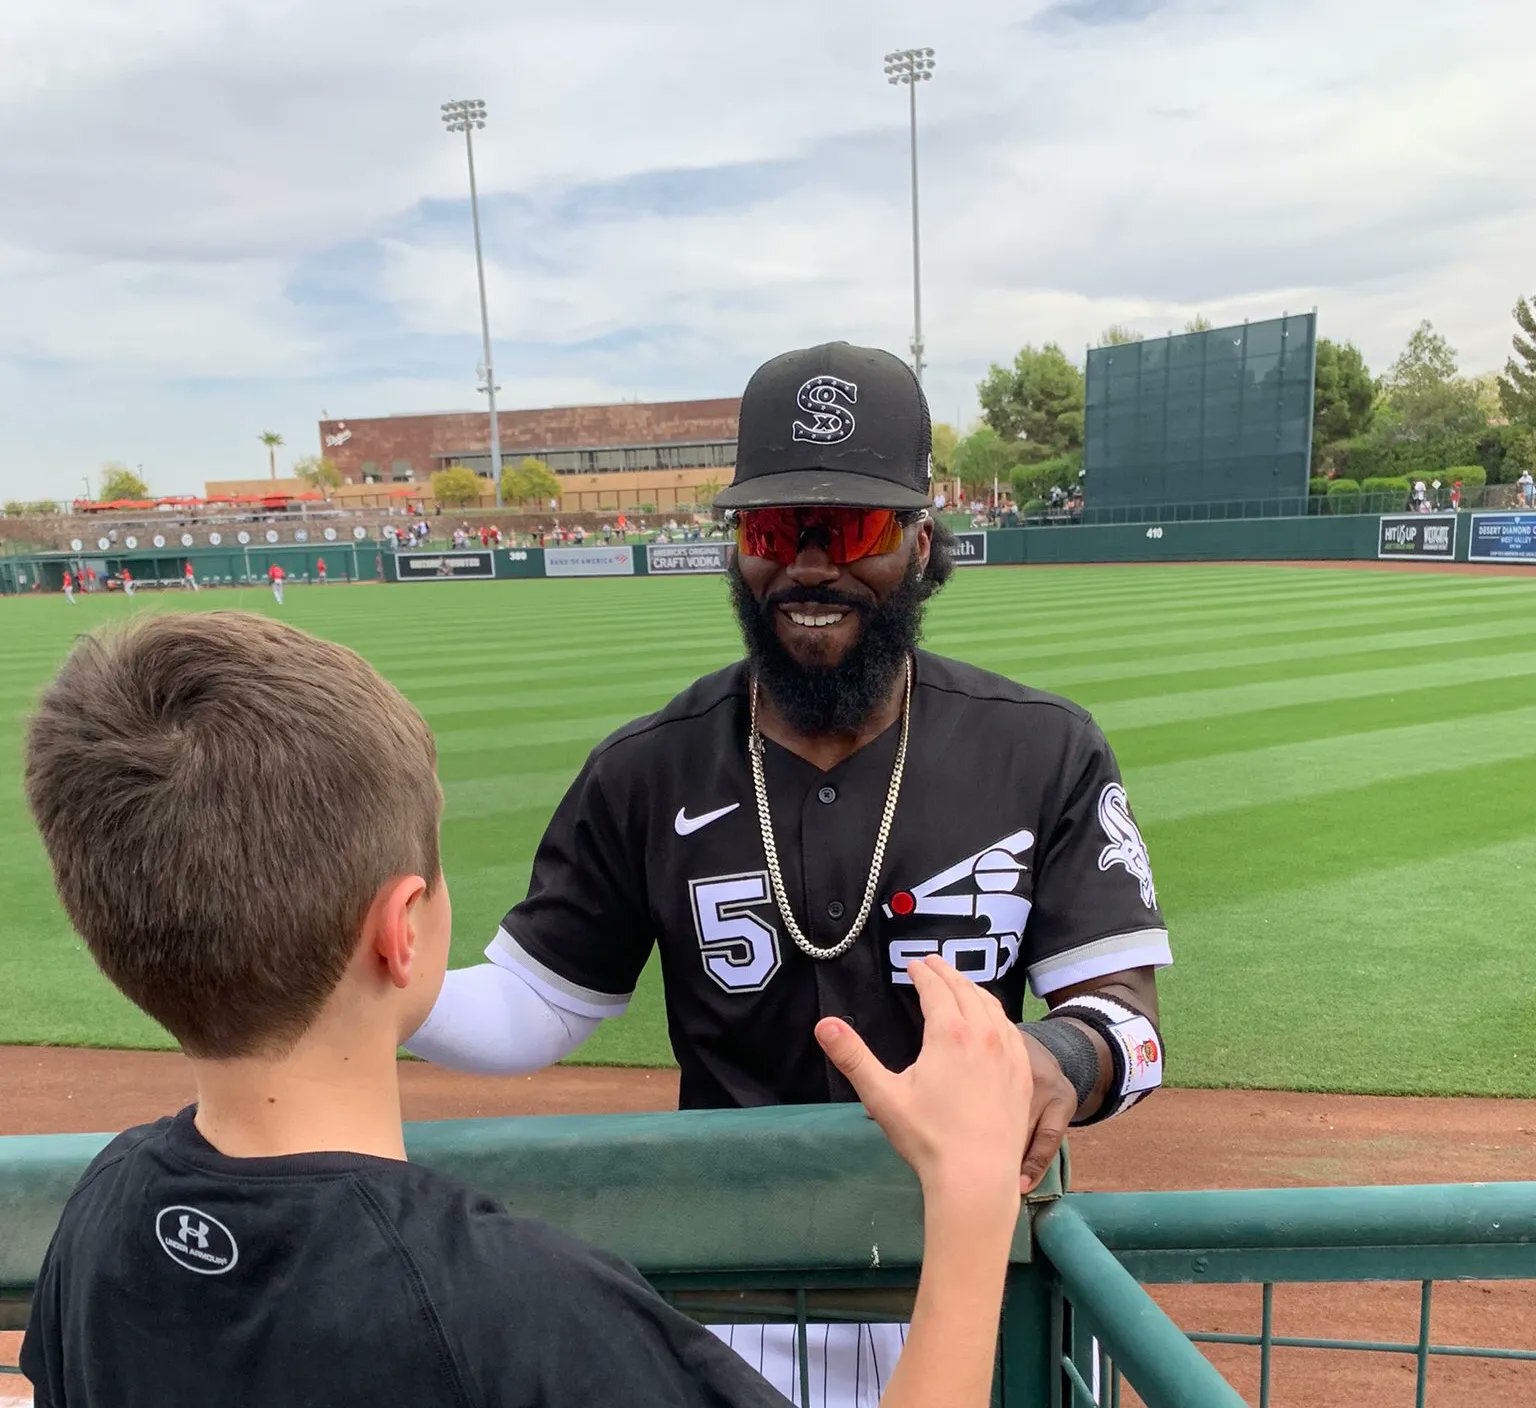 Happy Birthday to the White Sox Josh Harrison. Born on this date in 1987.  